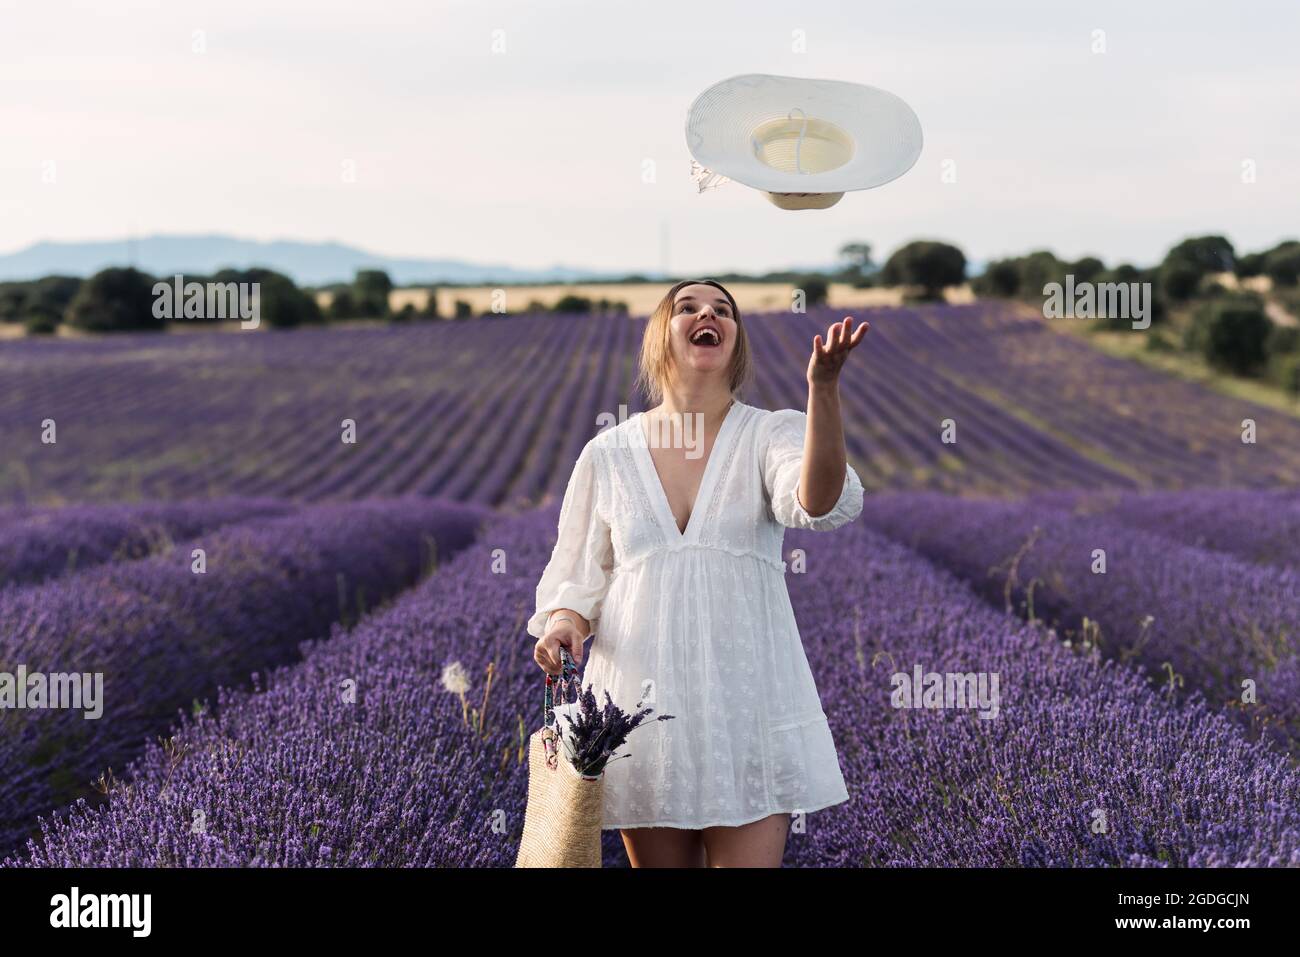 Pregnant woman throwing her hat in the air in lavender fields. Stock Photo